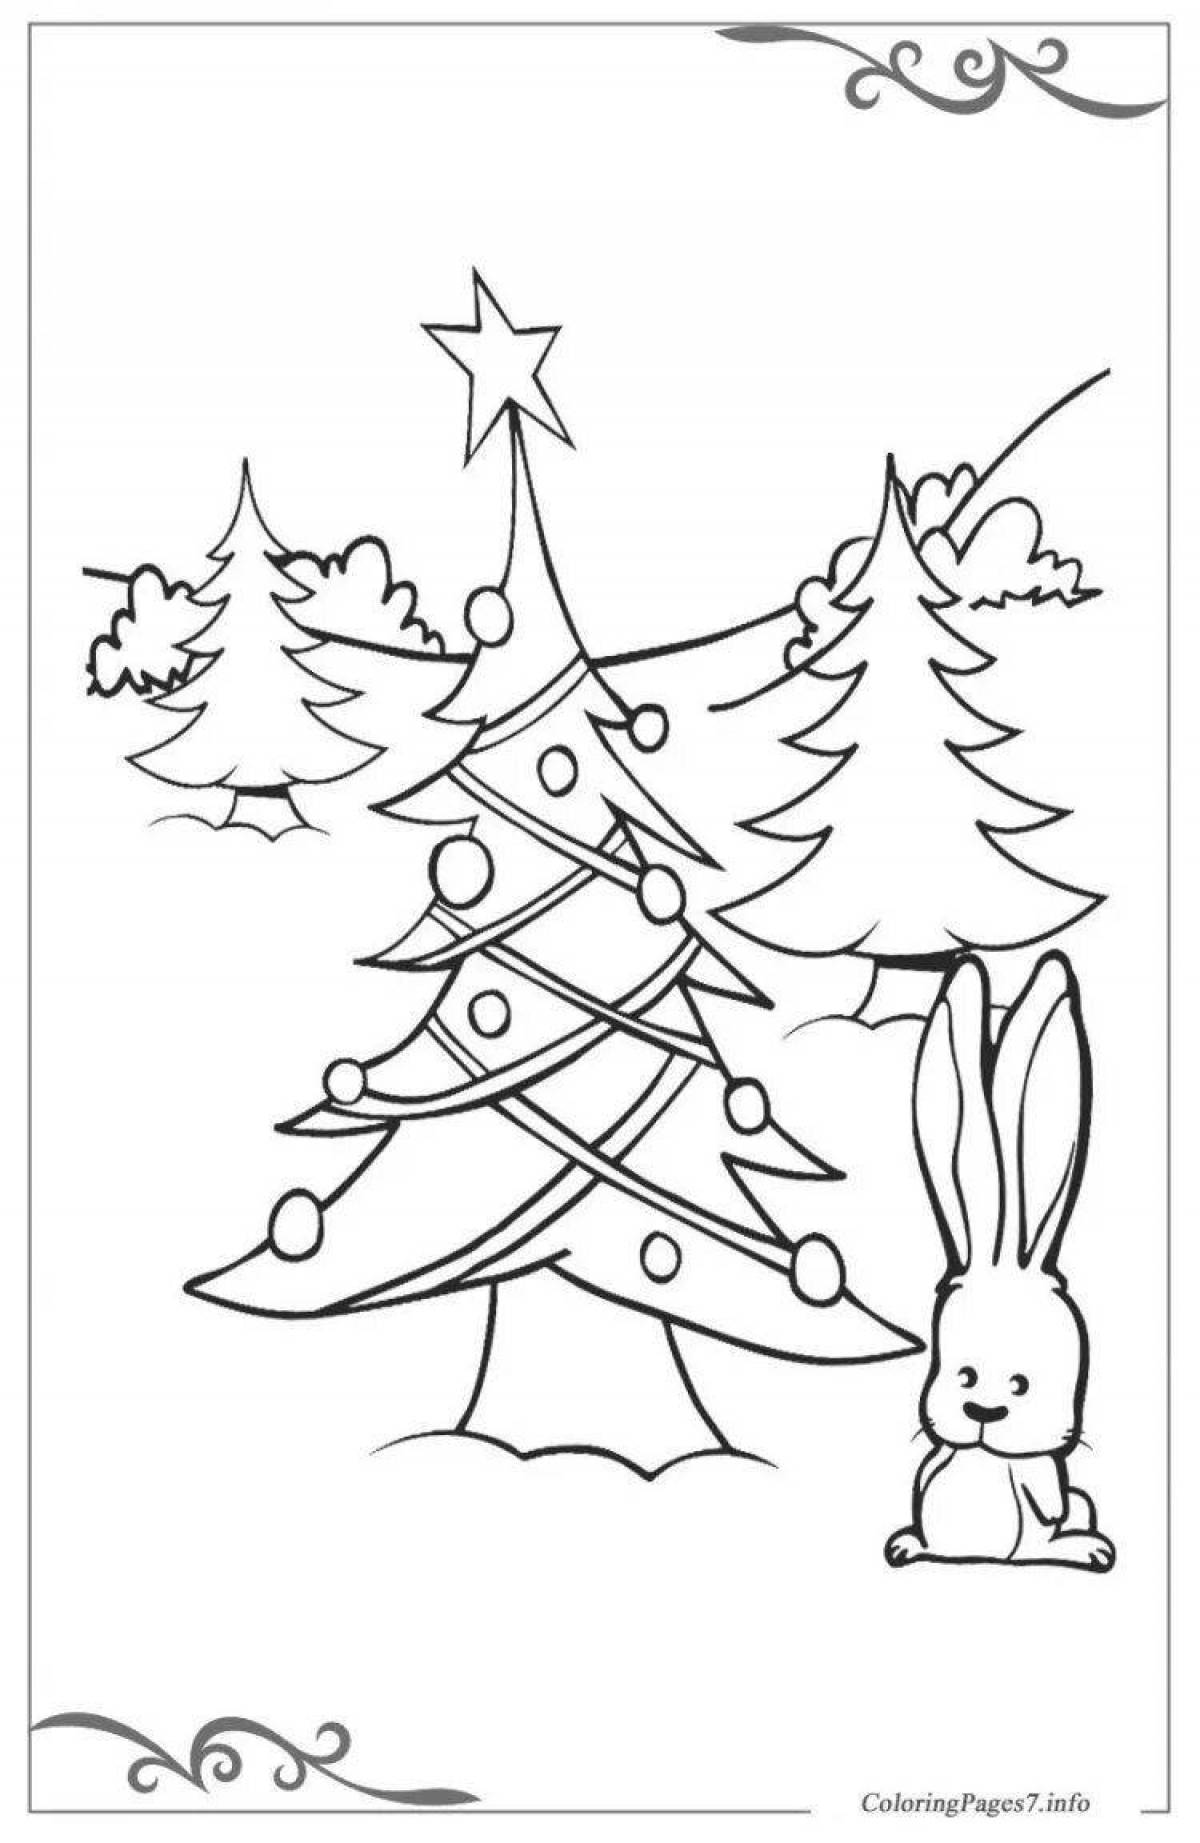 Coloring book bright forest grew a Christmas tree